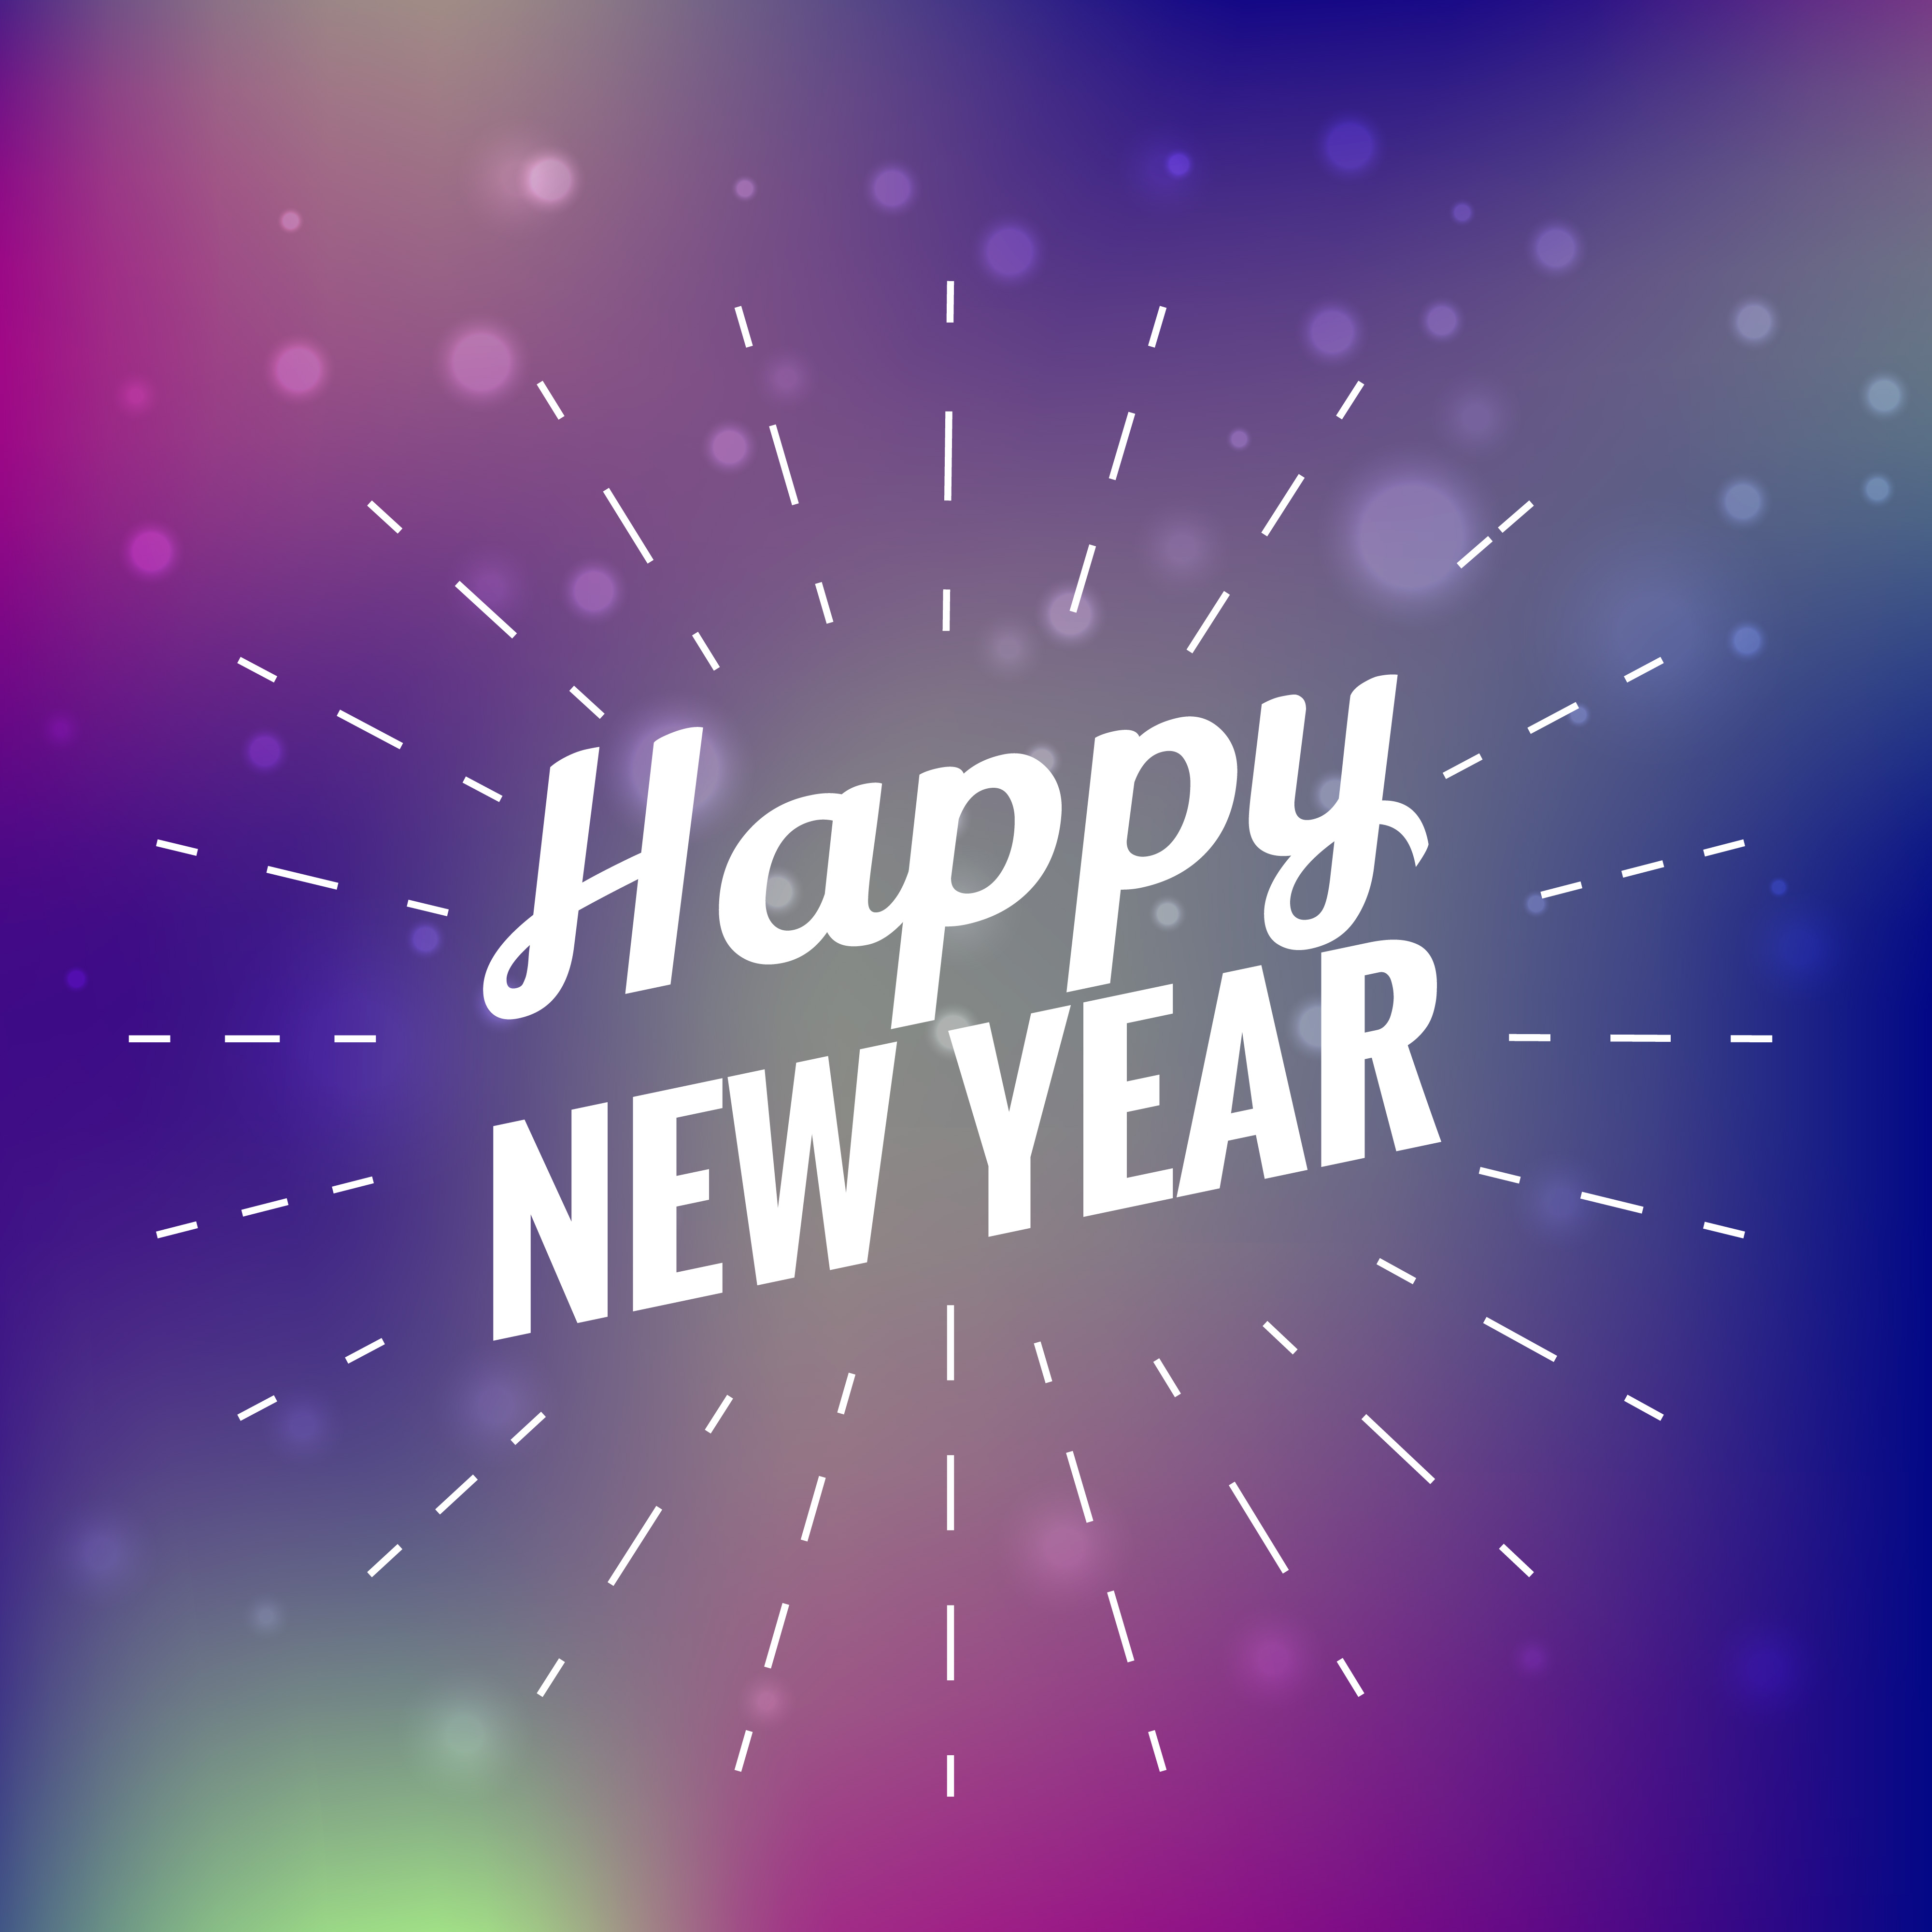 beautiful-happy-new-year-card-download-free-vector-art-stock